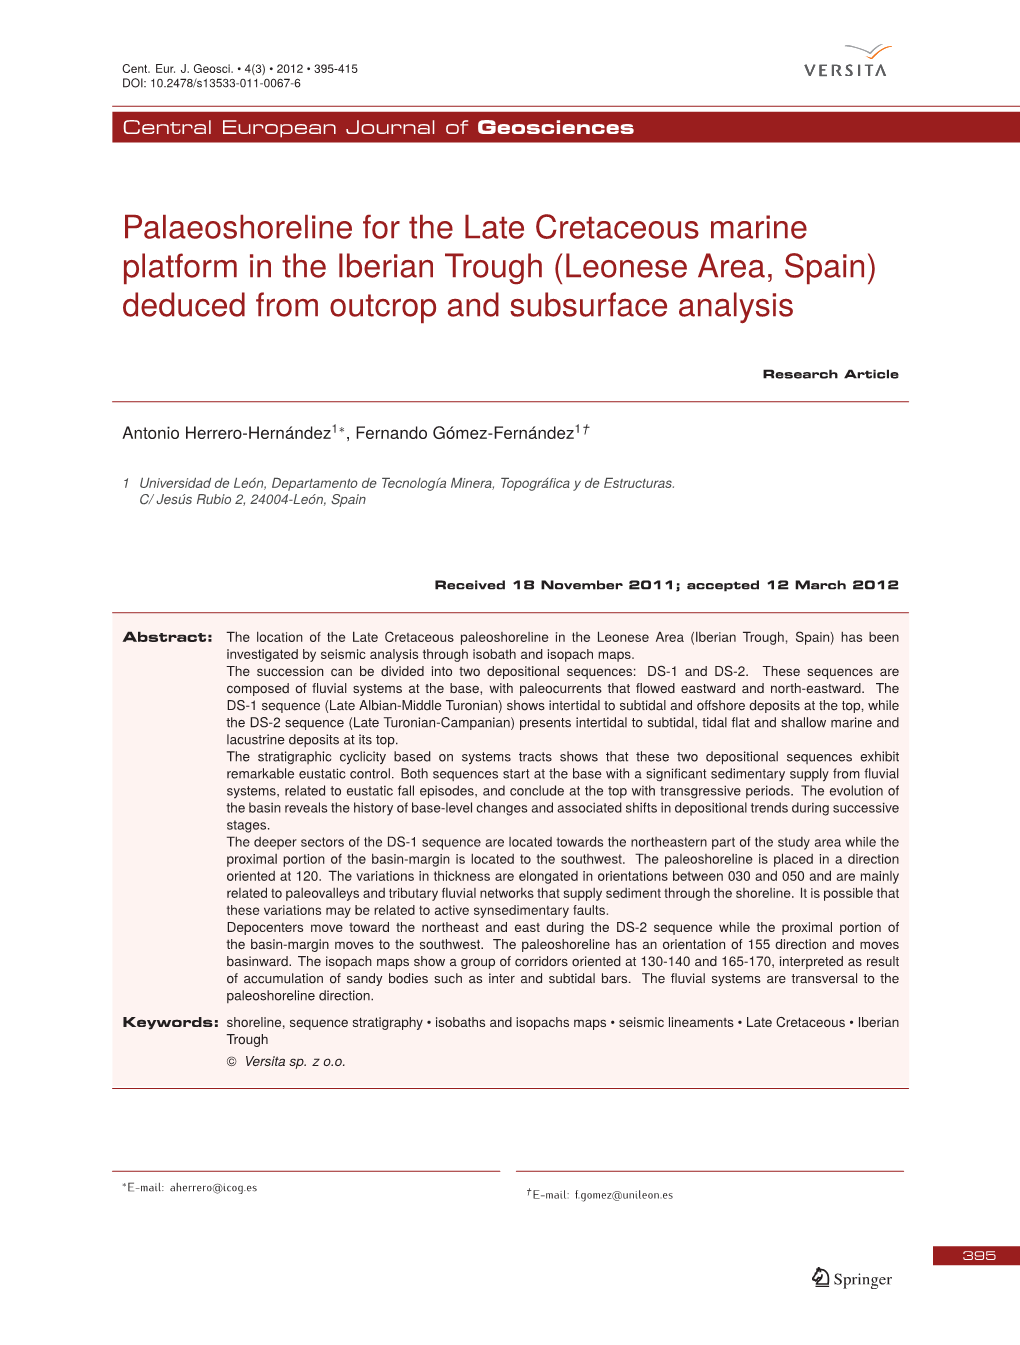 Palaeoshoreline for the Late Cretaceous Marine Platform in the Iberian Trough (Leonese Area, Spain) Deduced from Outcrop and Subsurface Analysis